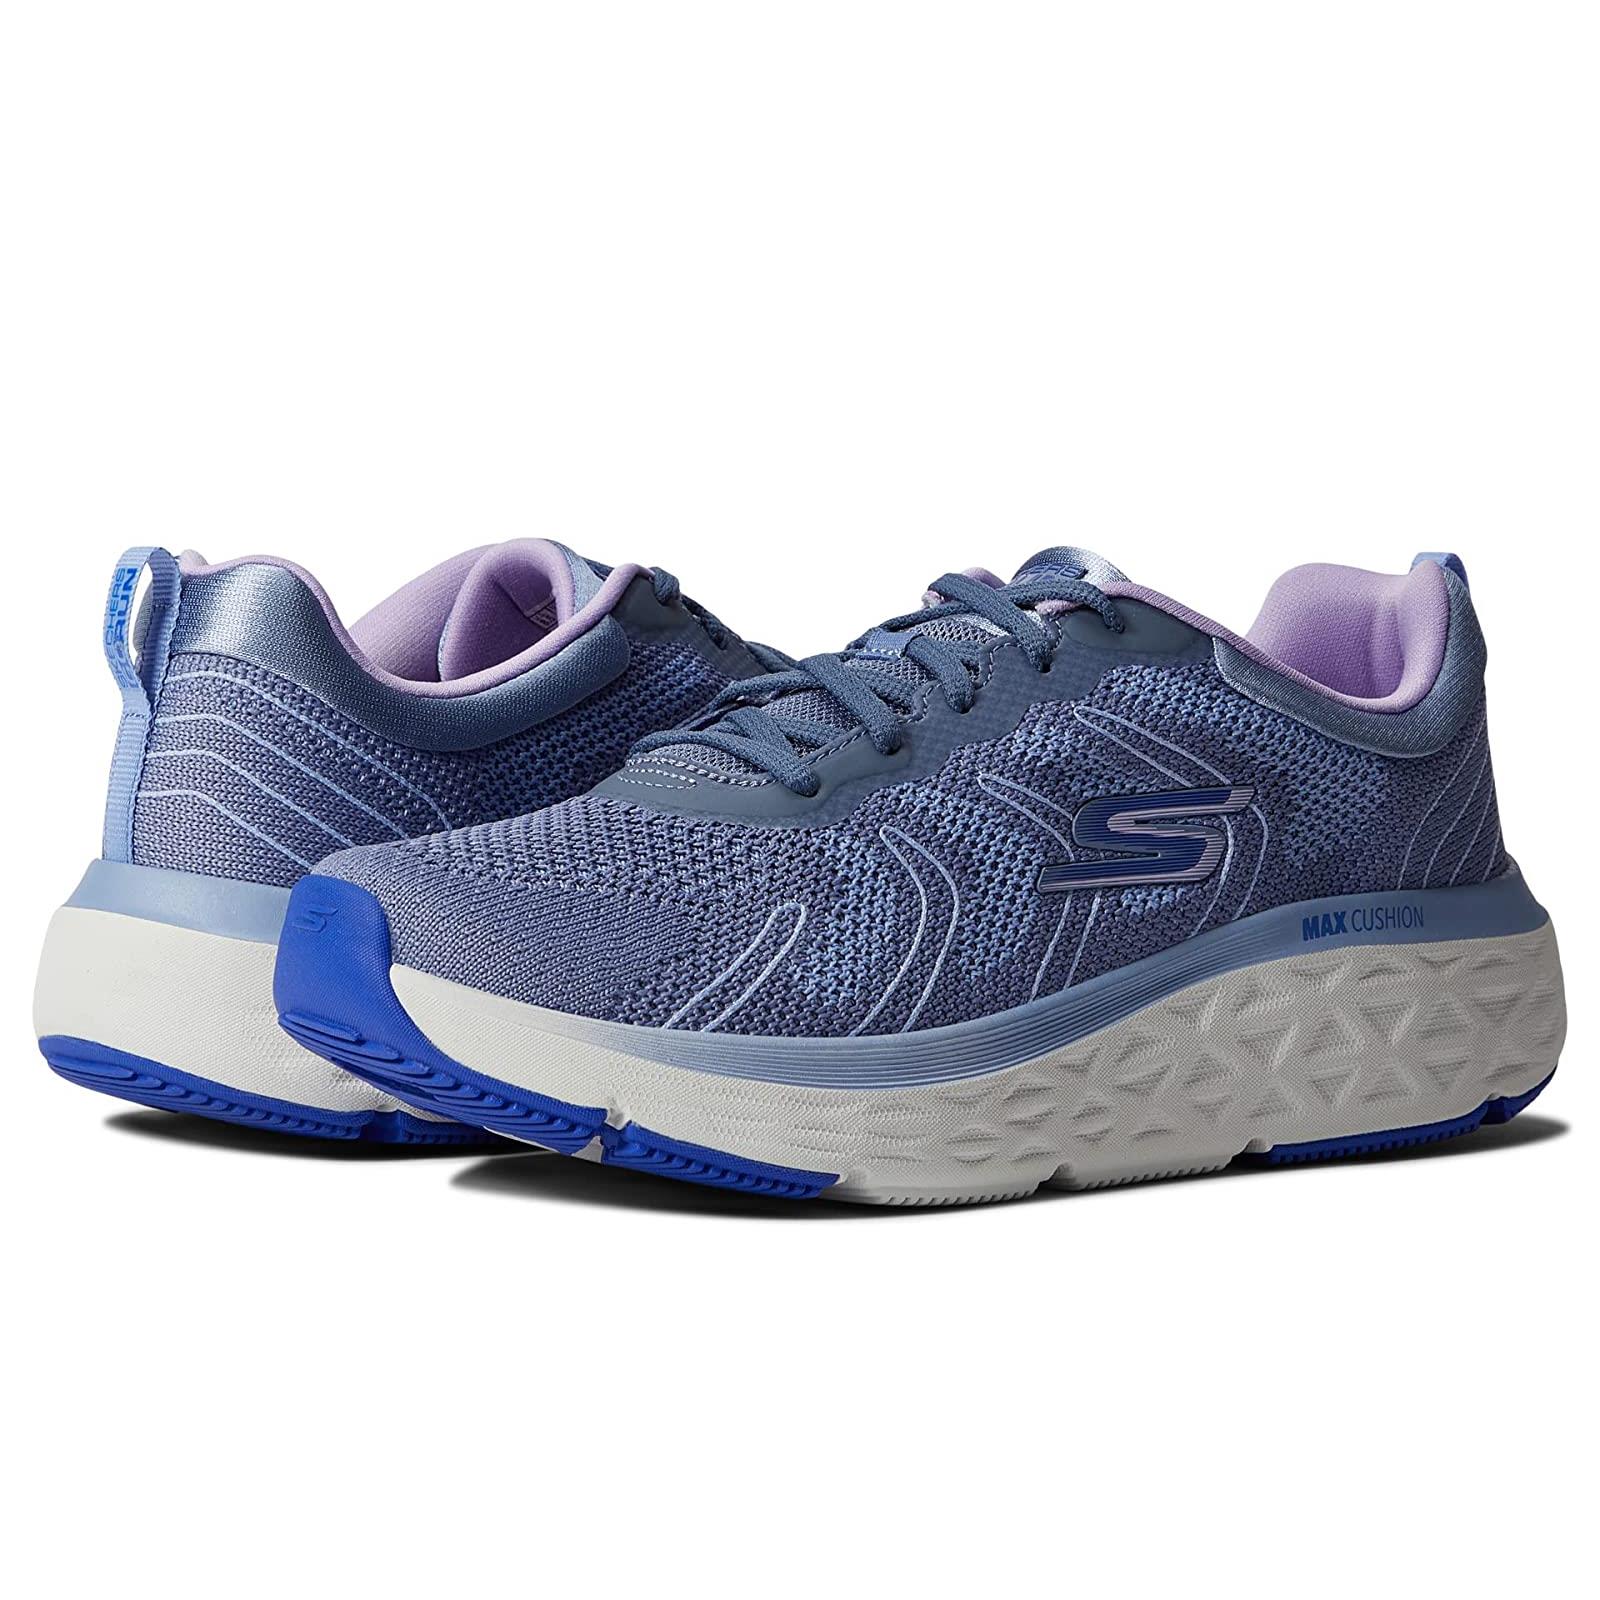 Woman`s Sneakers Athletic Shoes Skechers Max Cushioning Delta Blue/Lavender